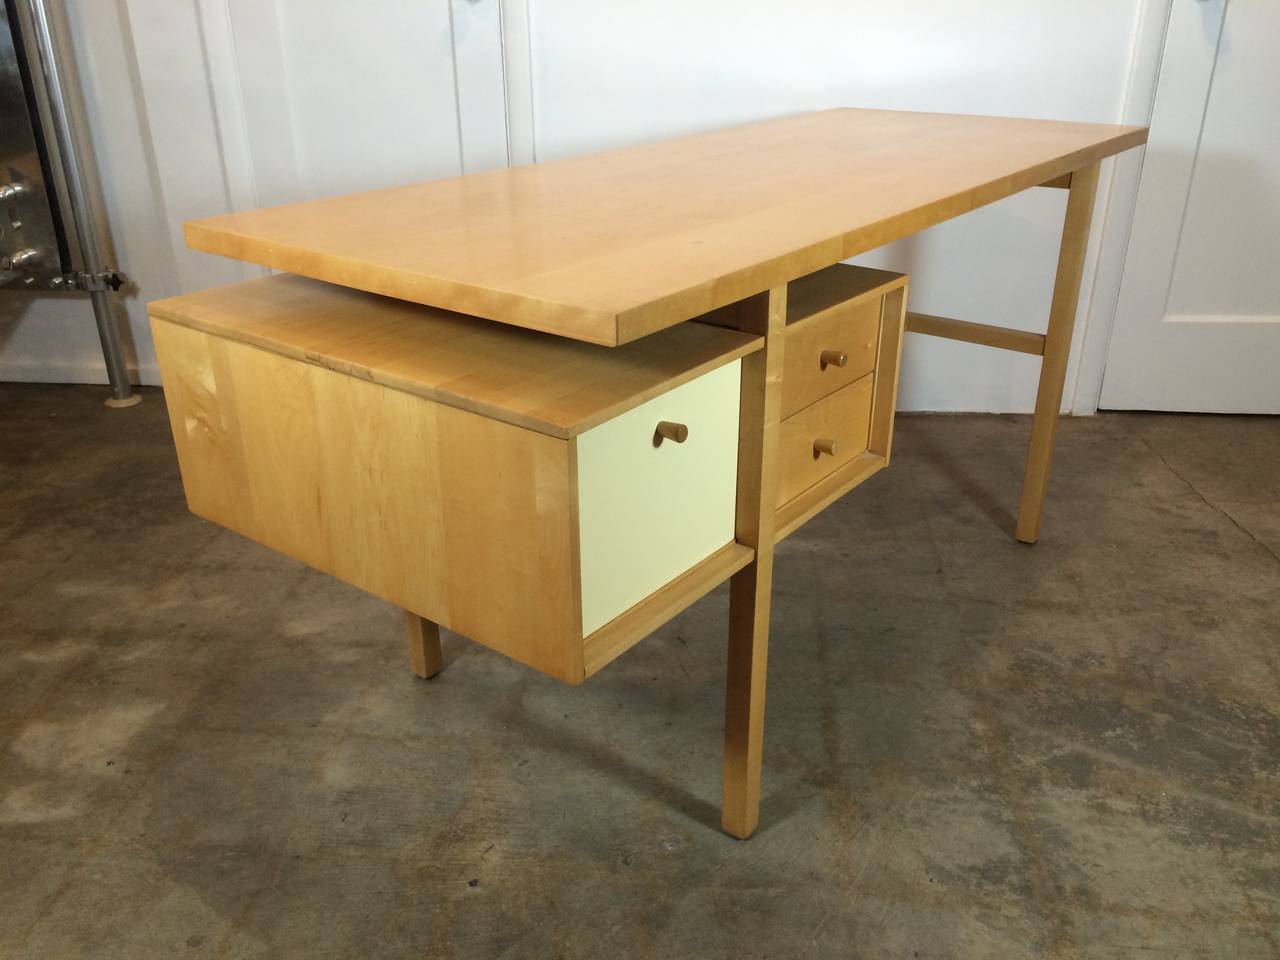 A RARE DESK, MODEL NO. 3116
Designed by Milo Baughman and manufactured by Murray Furniture company, Winchendon, MA. The original tag resides in the upper right drawer of the desk. Baughman designed the interior and exterior of his family home, his